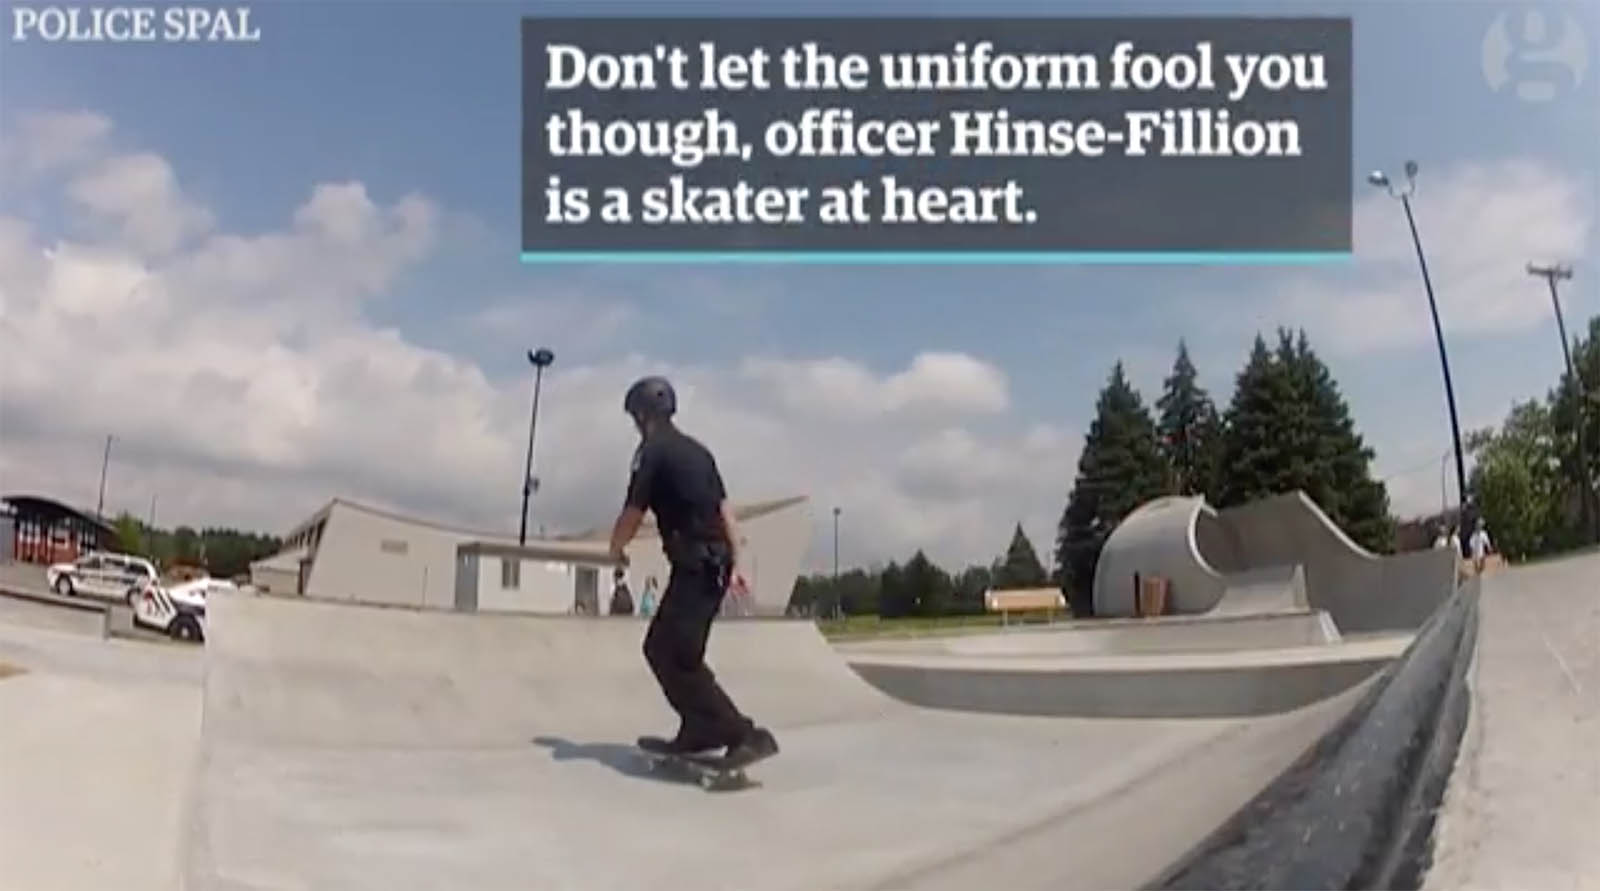 Canada's Skateboarding Cop, Thierry Hinse-Fillion